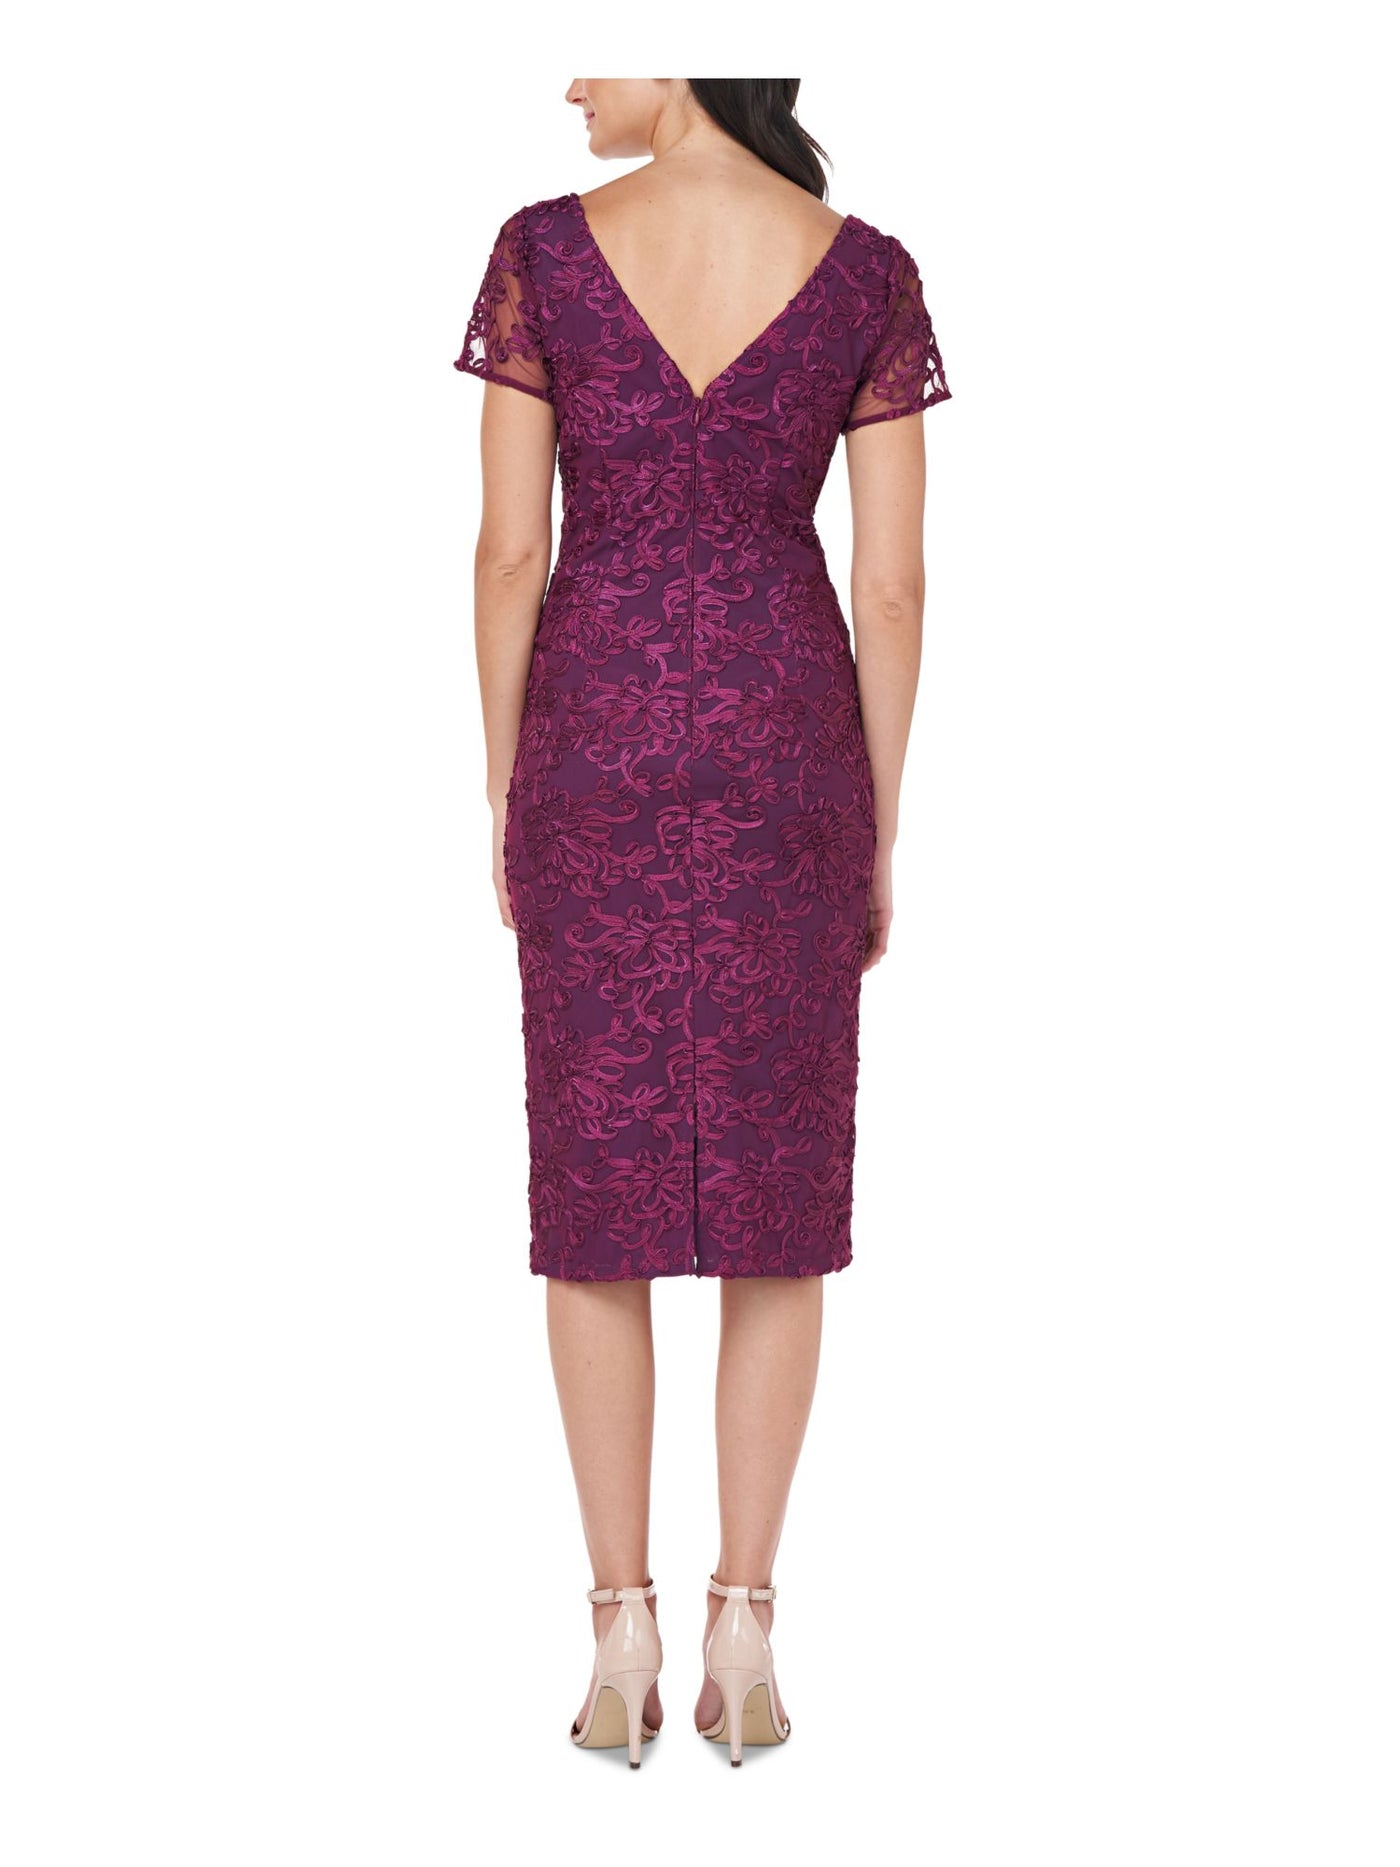 JS COLLECTION Womens Purple Embroidered Floral V Neck Midi Evening Sheath Dress 4